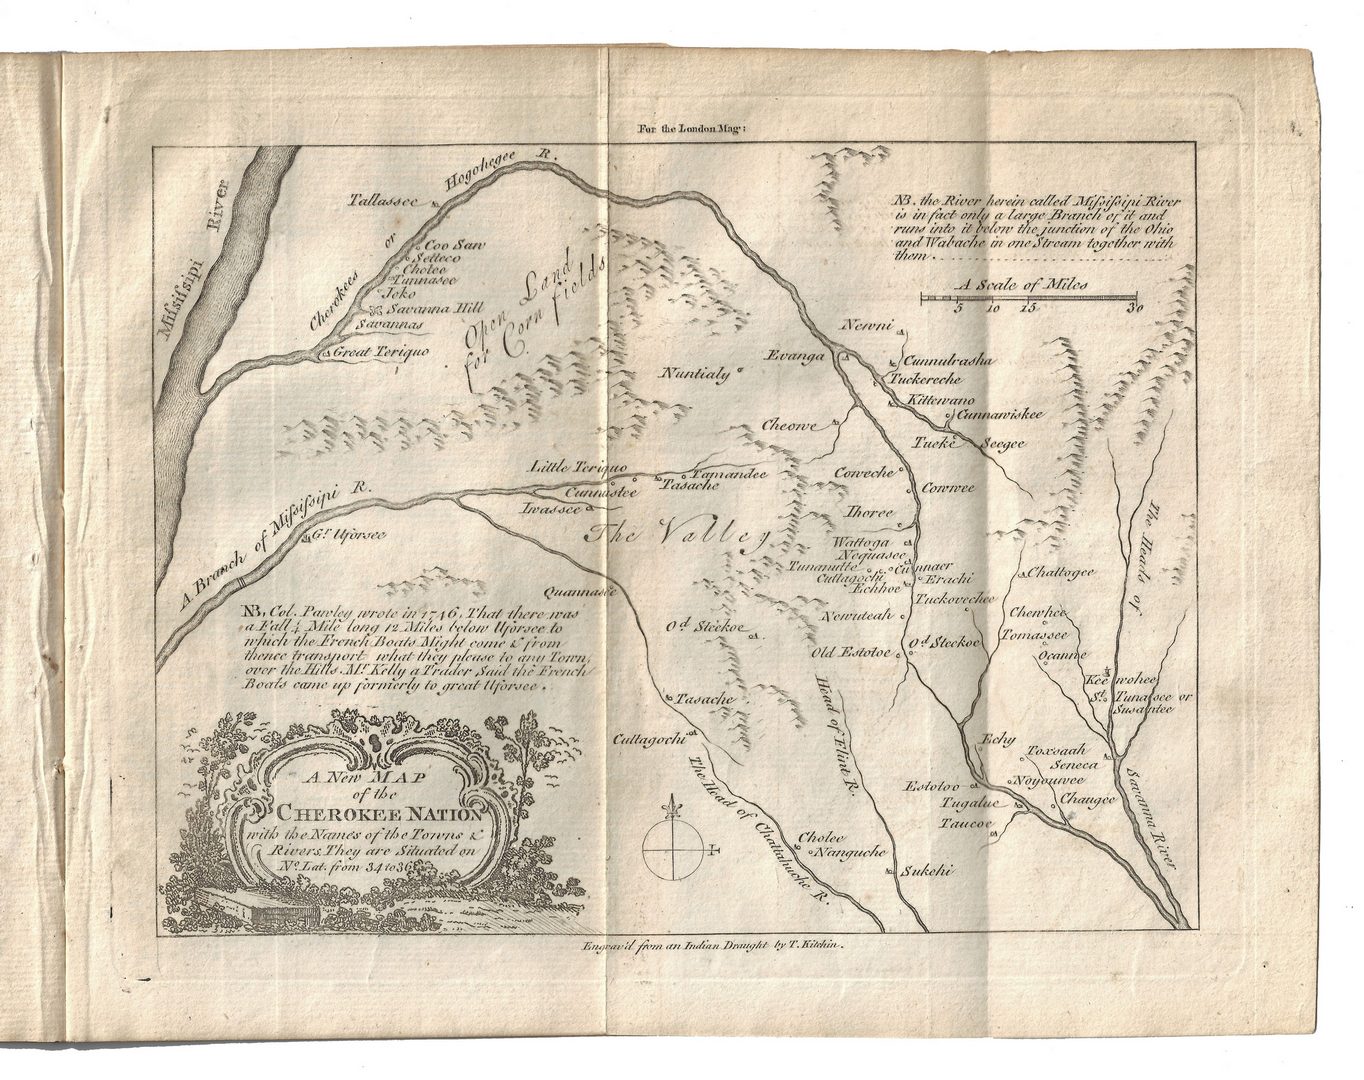 Lot 287: New Map of Cherokee Nation, uncut from the London Magazine